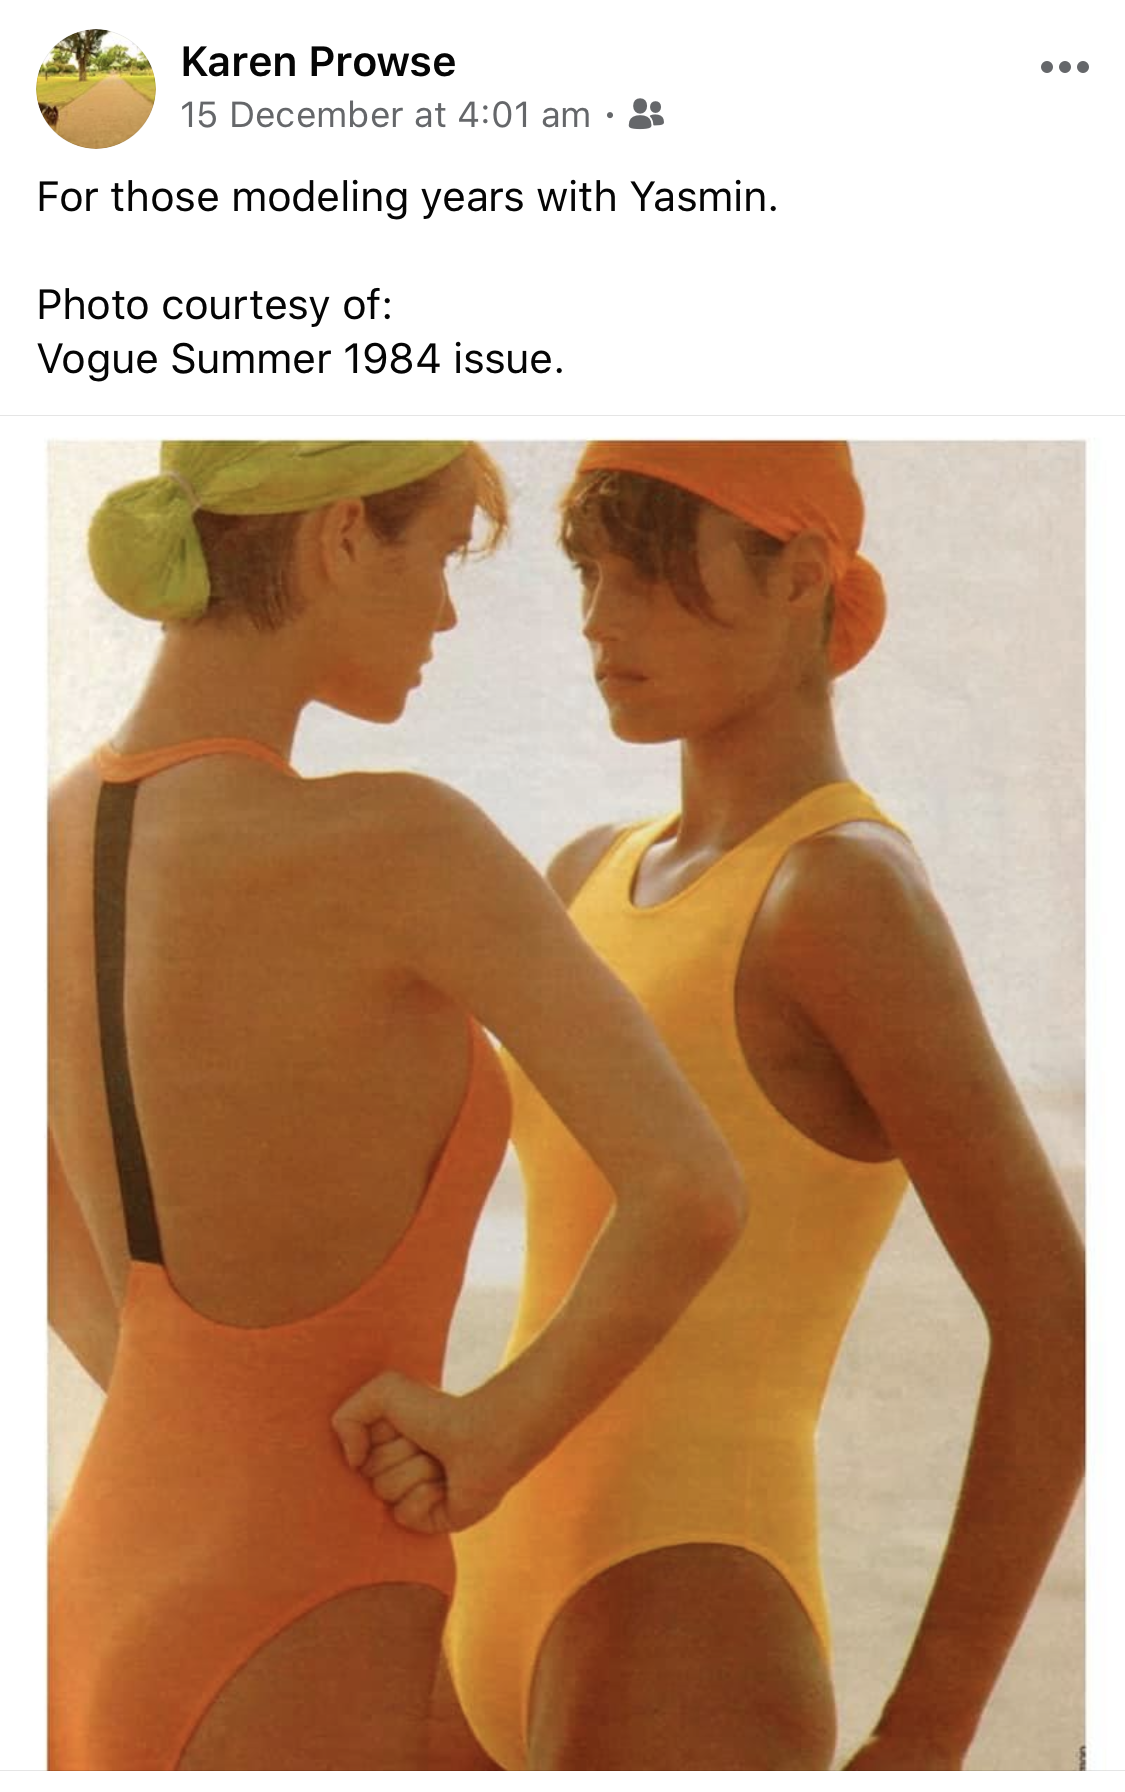 A screenshot of a Facebook post showing two models posing together.